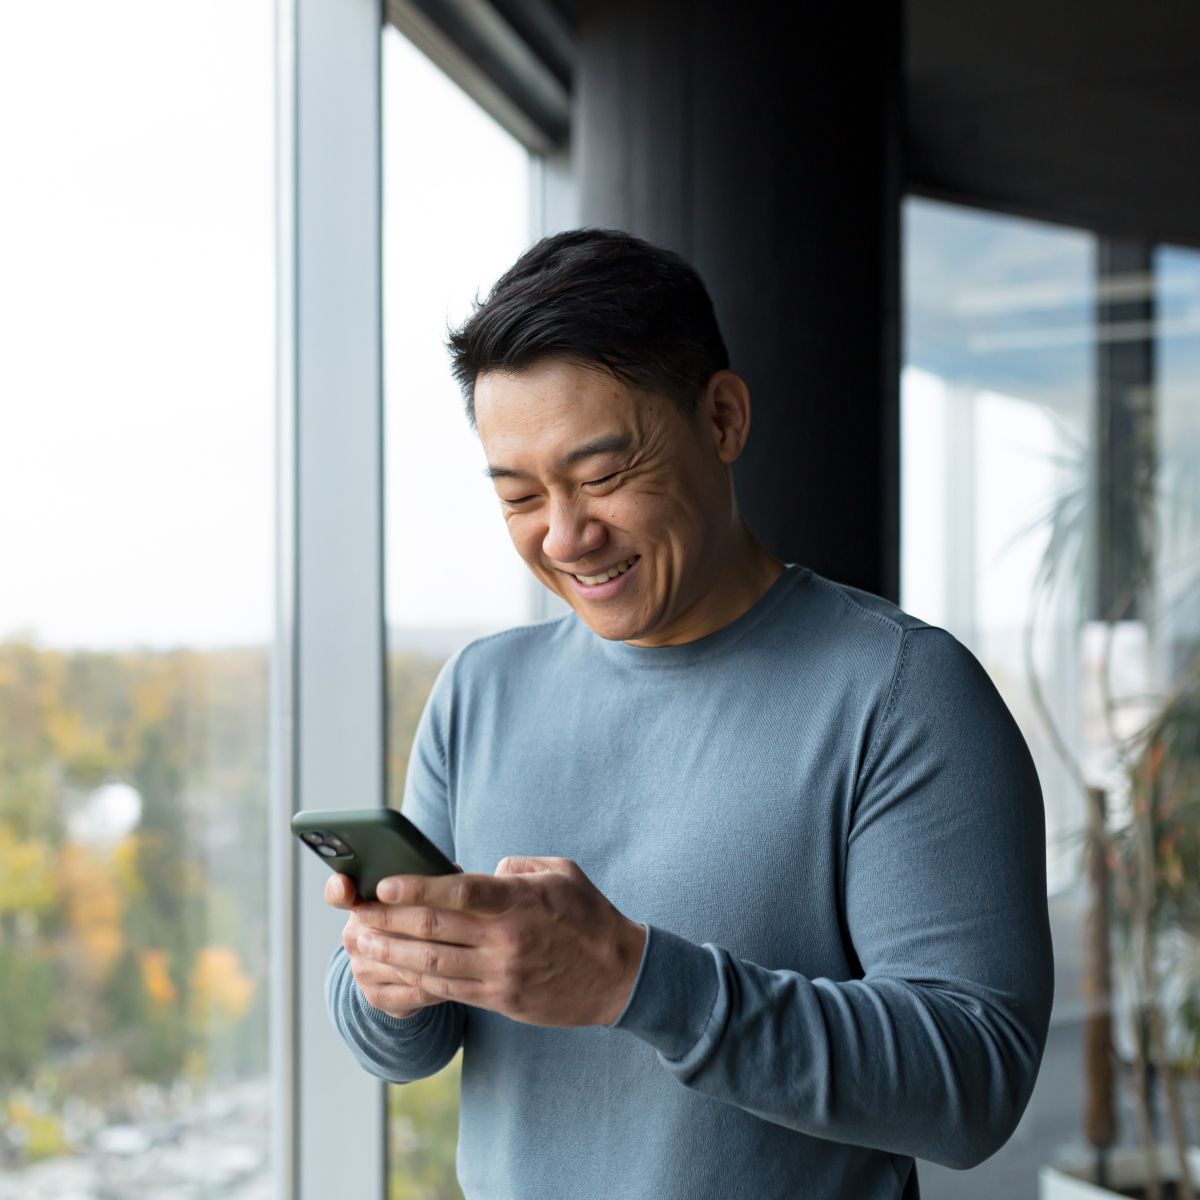 Asian man smiling down at cellphone screen